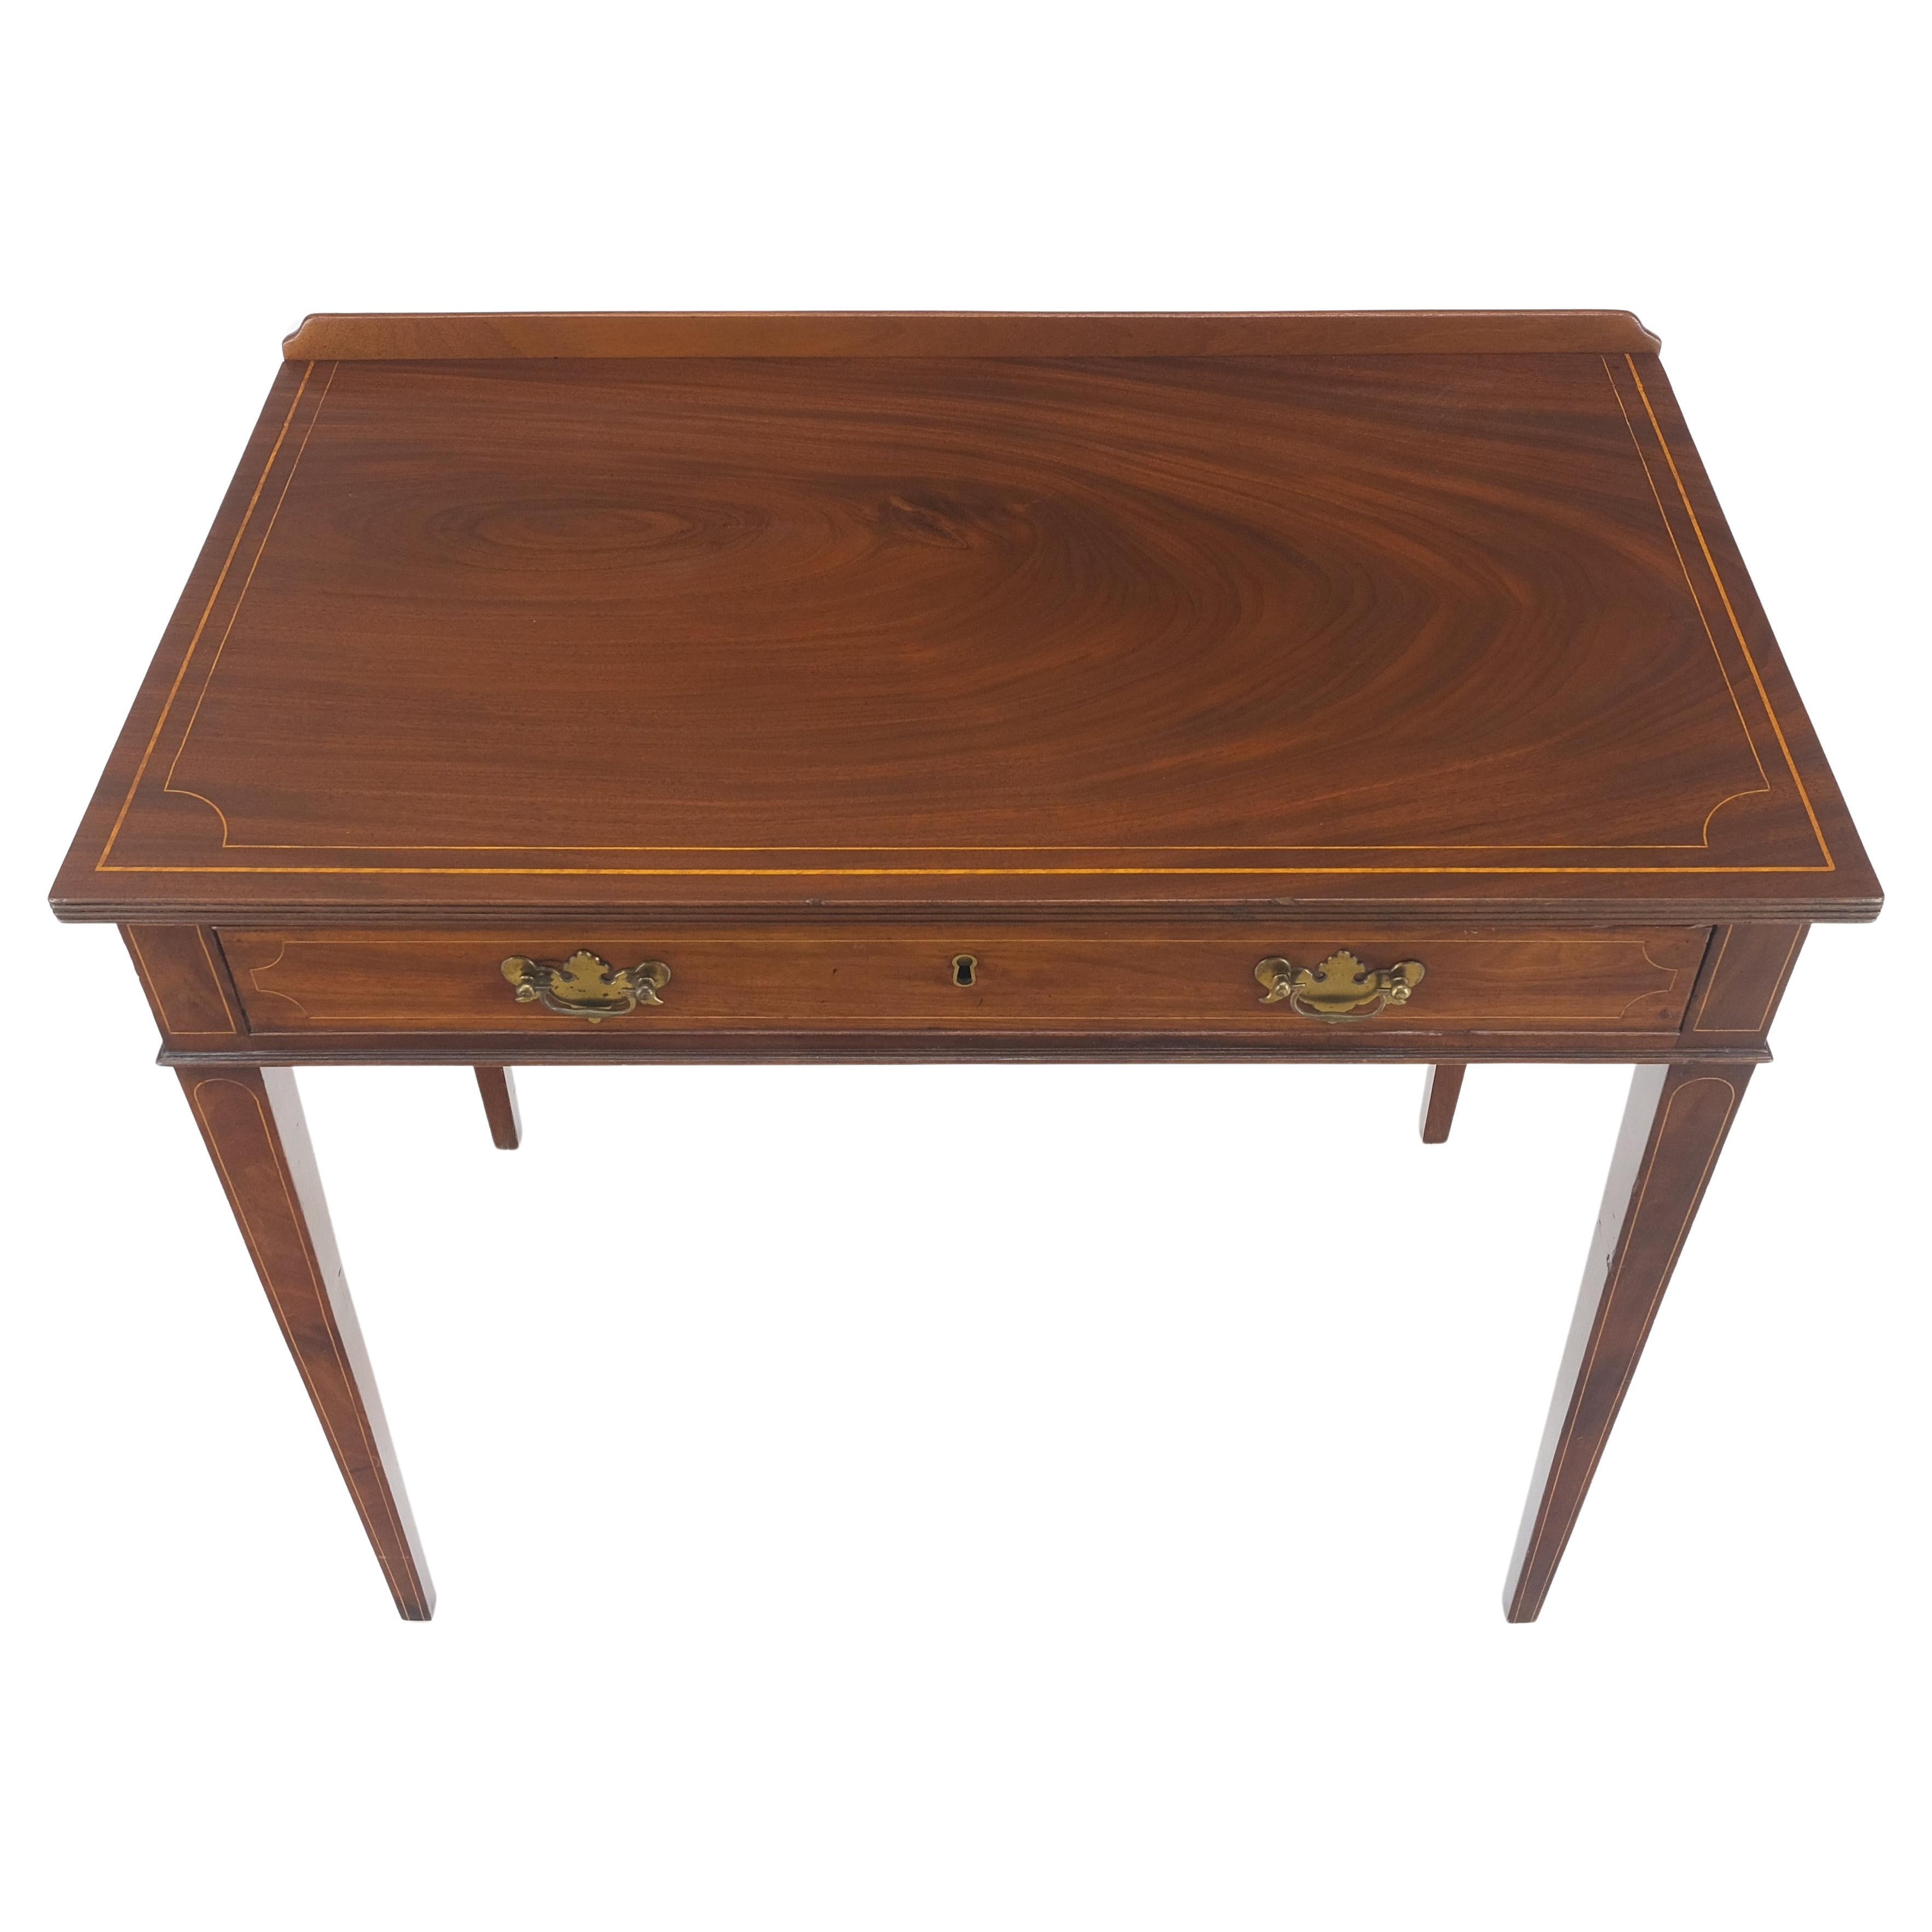 c.1880s Fine One Drawer Inlayed Solid Crotch Mahogany Top Console Table MINT! For Sale